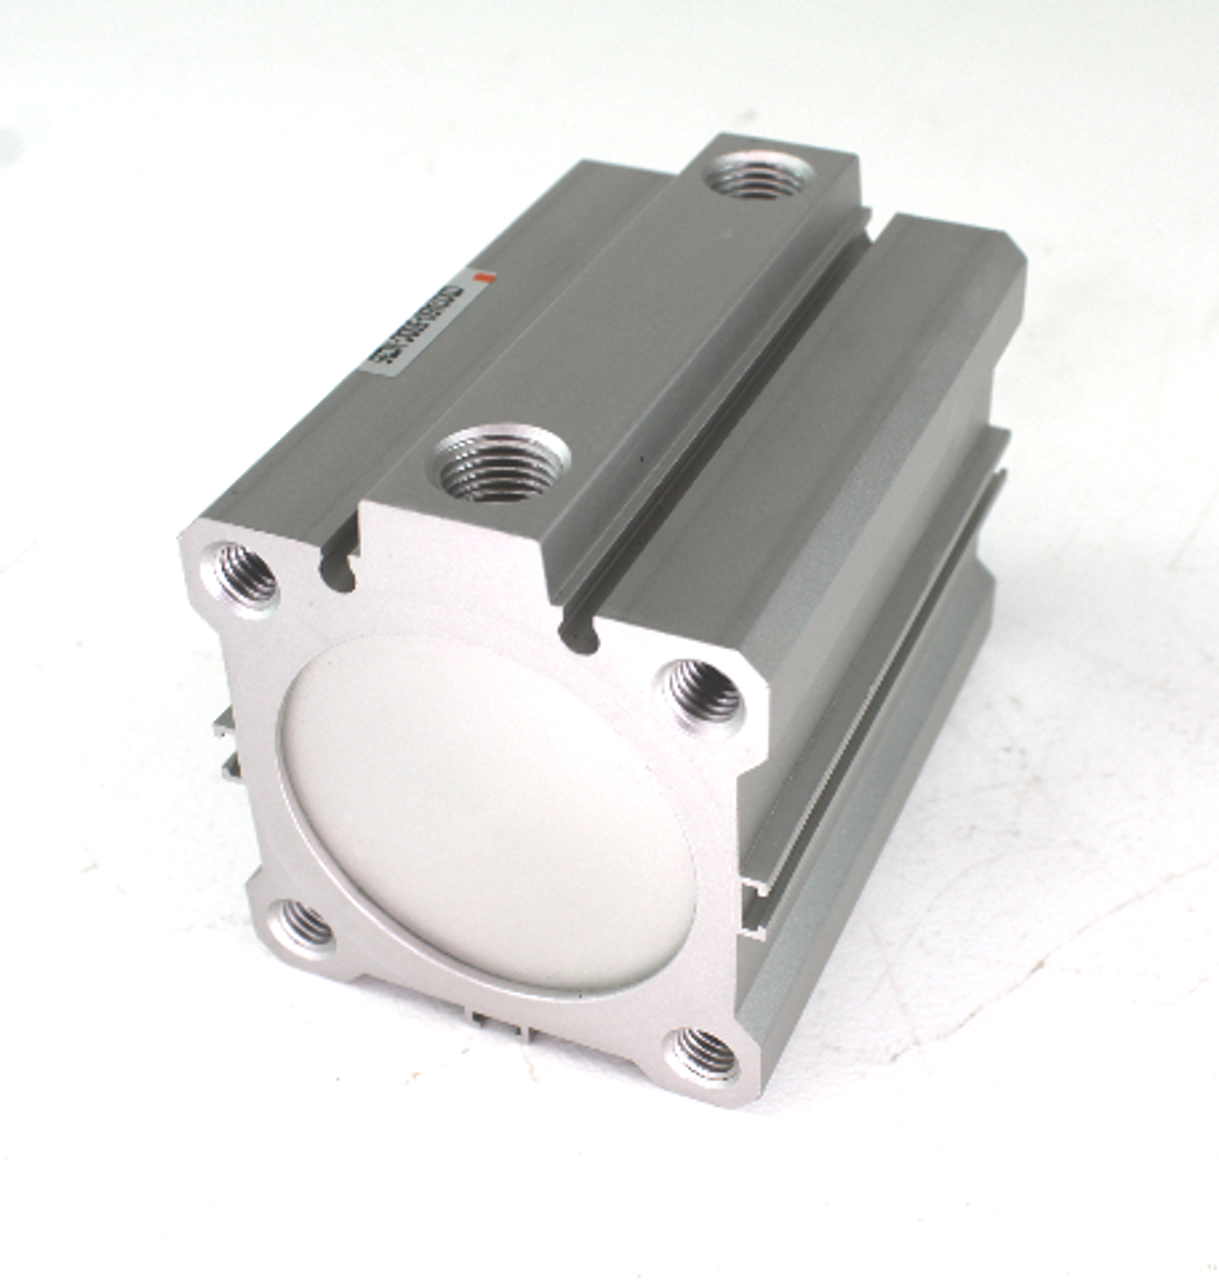 SMC CDQ2A50-50DC-XC35 Compact Pneumatic Cylinder 50mm Bore 50mm Stroke